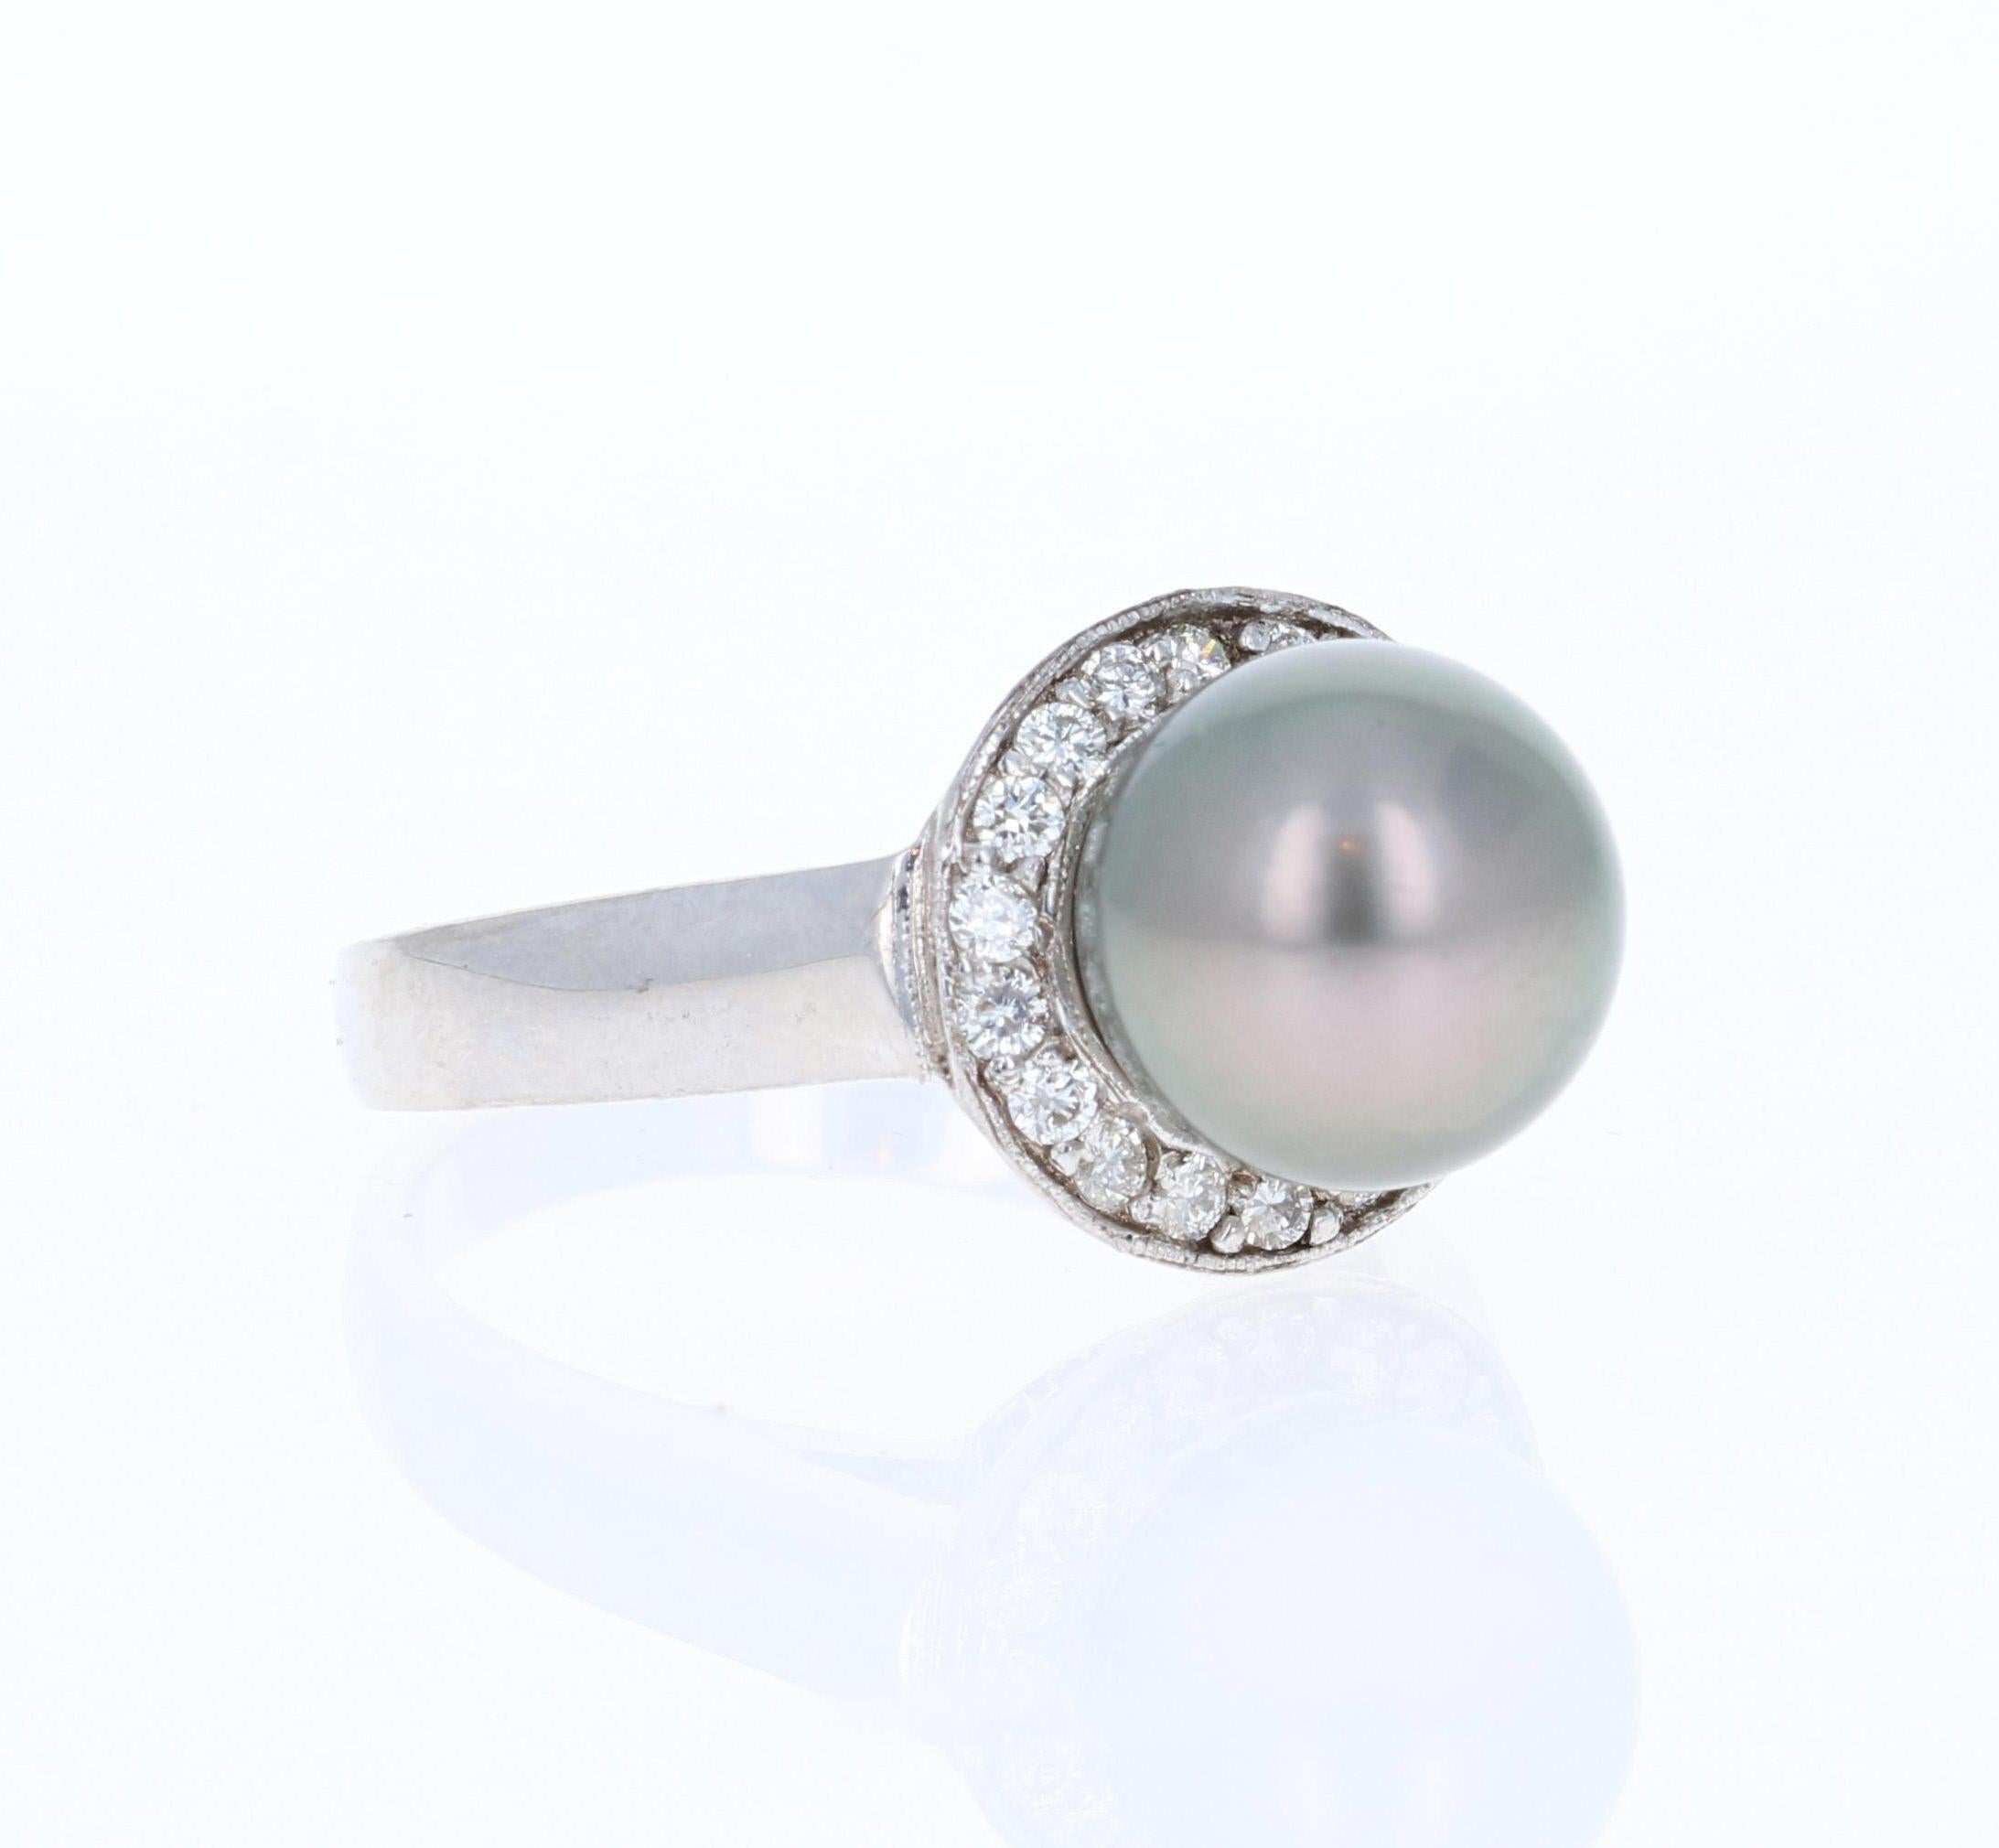 Tahitian Pearl Ring that has a 9mm Pearl and is surrounded by 18 Round Cut Diamonds that weigh 0.28 carats. (Clarity: VS2, Color: H)
The Ring is made in 14K White Gold and weigh approximately 3.8 grams.   The ring is a size 7 and can be resized at